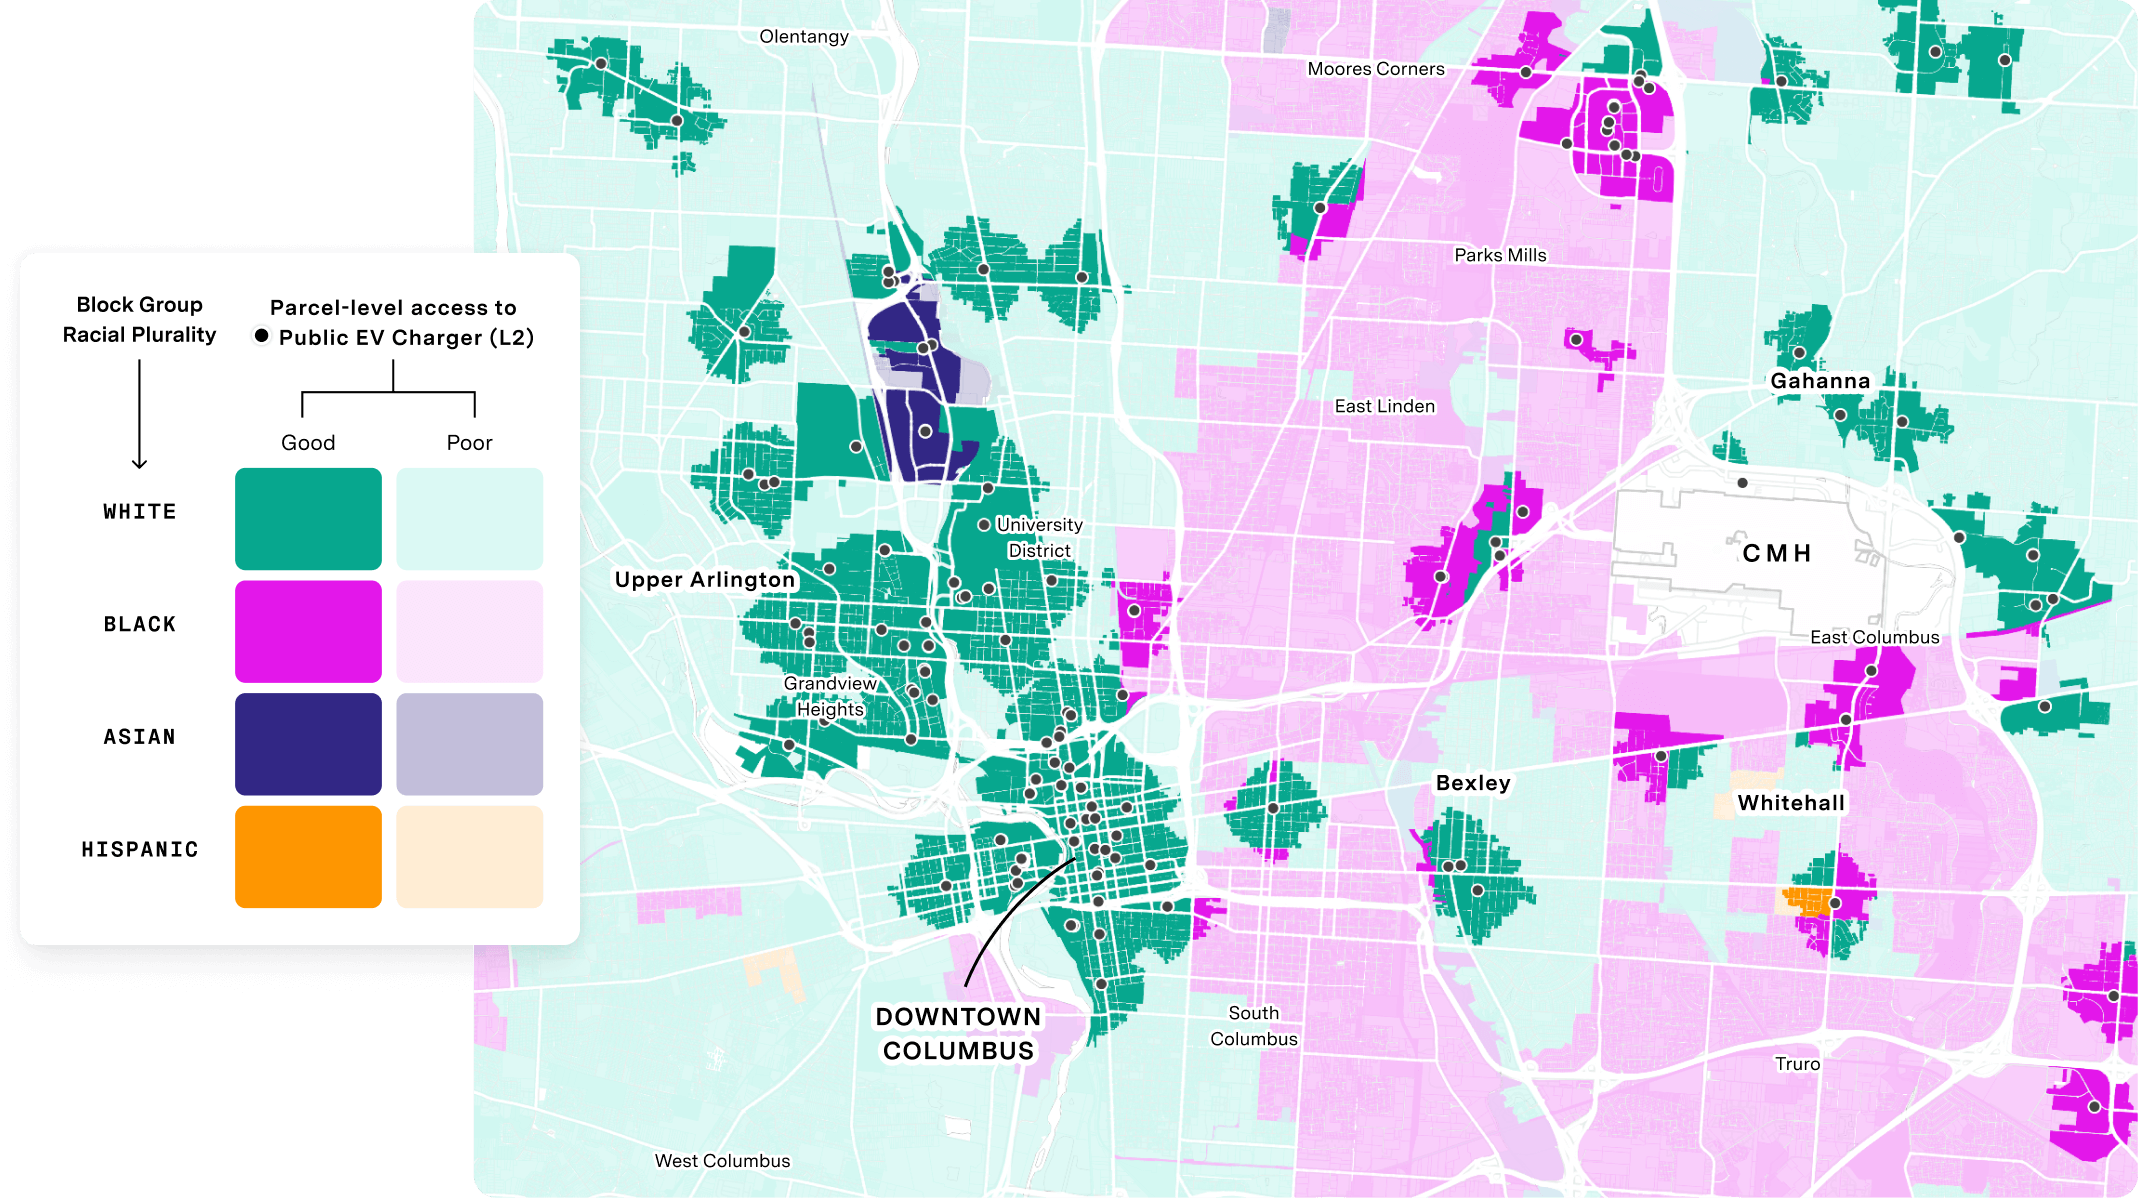 Racial Plurality Map of EV Chargers